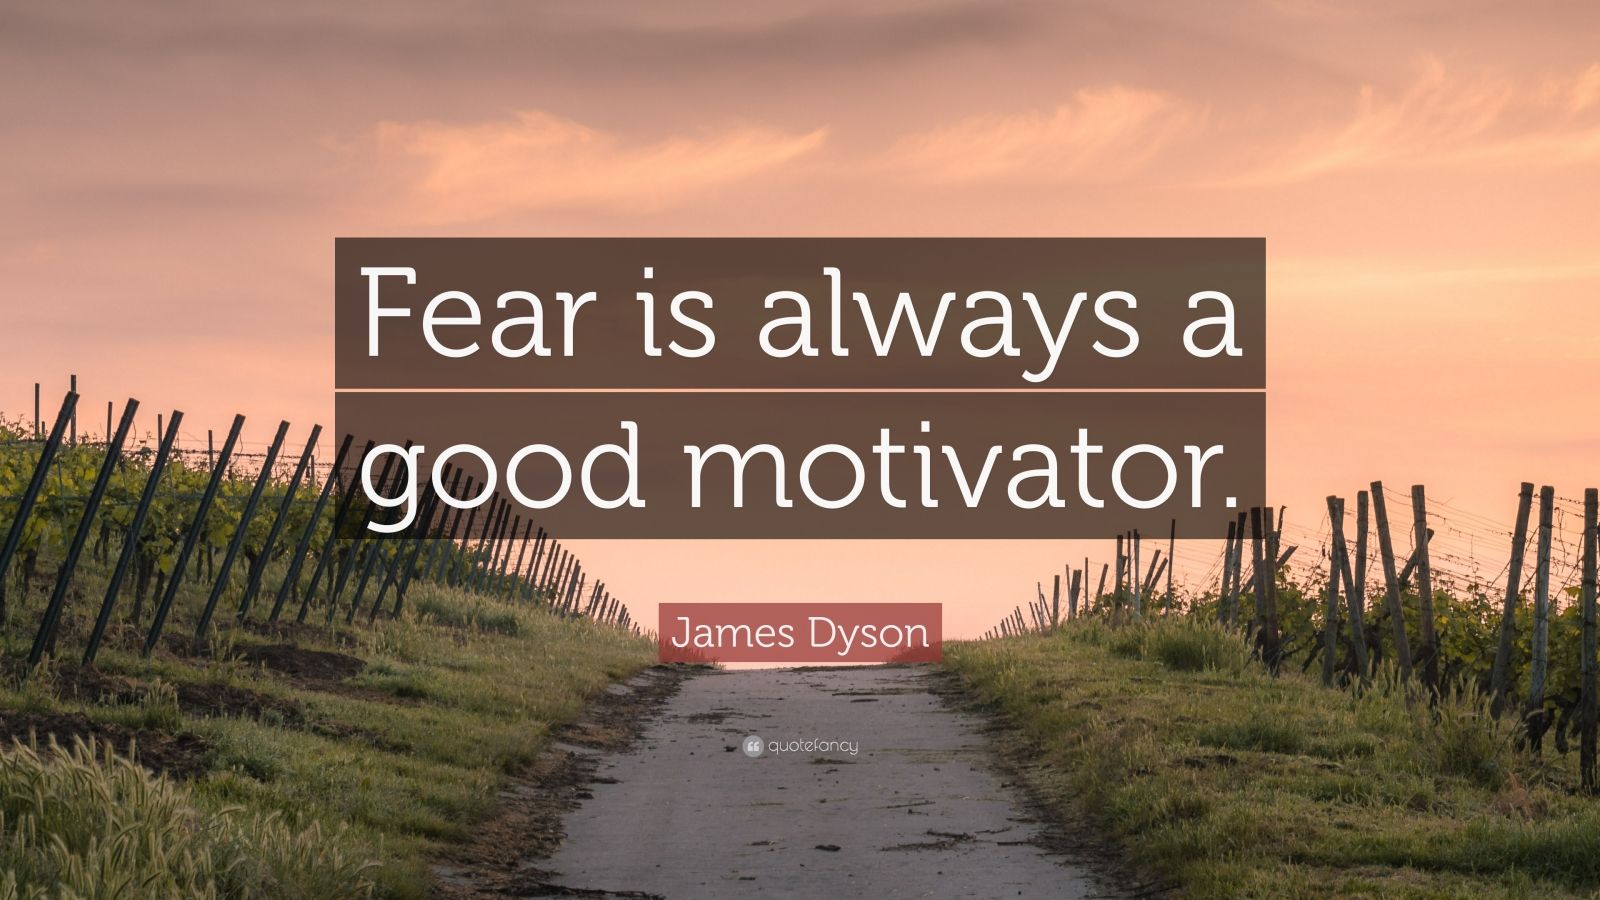 James Dyson Quote: “Fear is always a good motivator.” (9 wallpapers